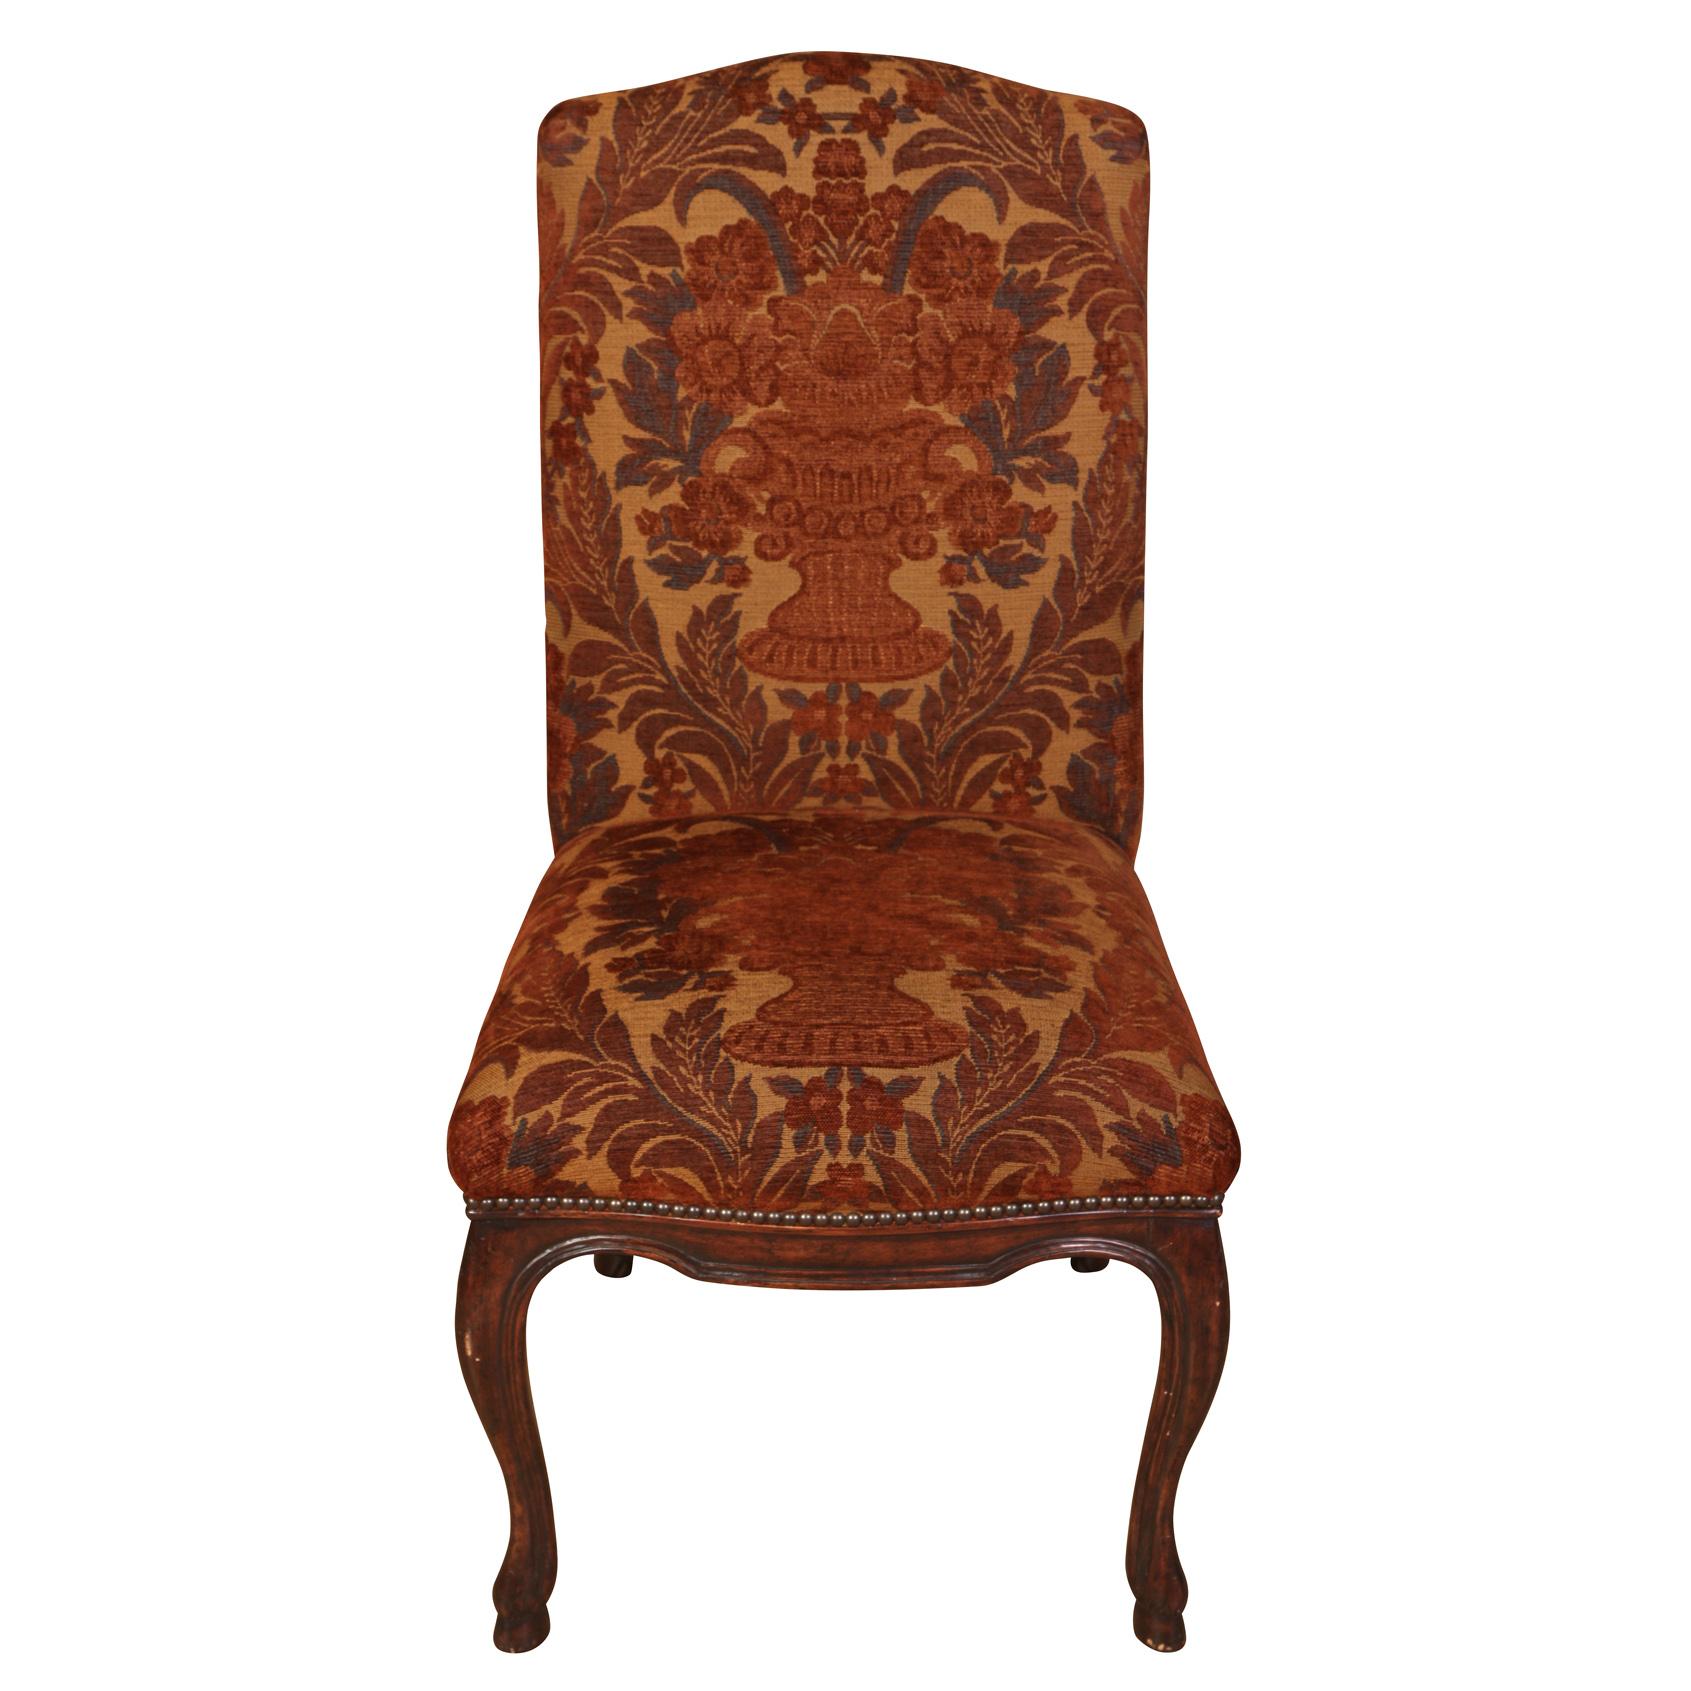 A vintage set of dining chairs by Michael Taylor with cranberry and gold brocade fabric of urns with flowers and leaves, cabriole legs and nail head trim to shaped seat backs. Armchairs measure 23.5